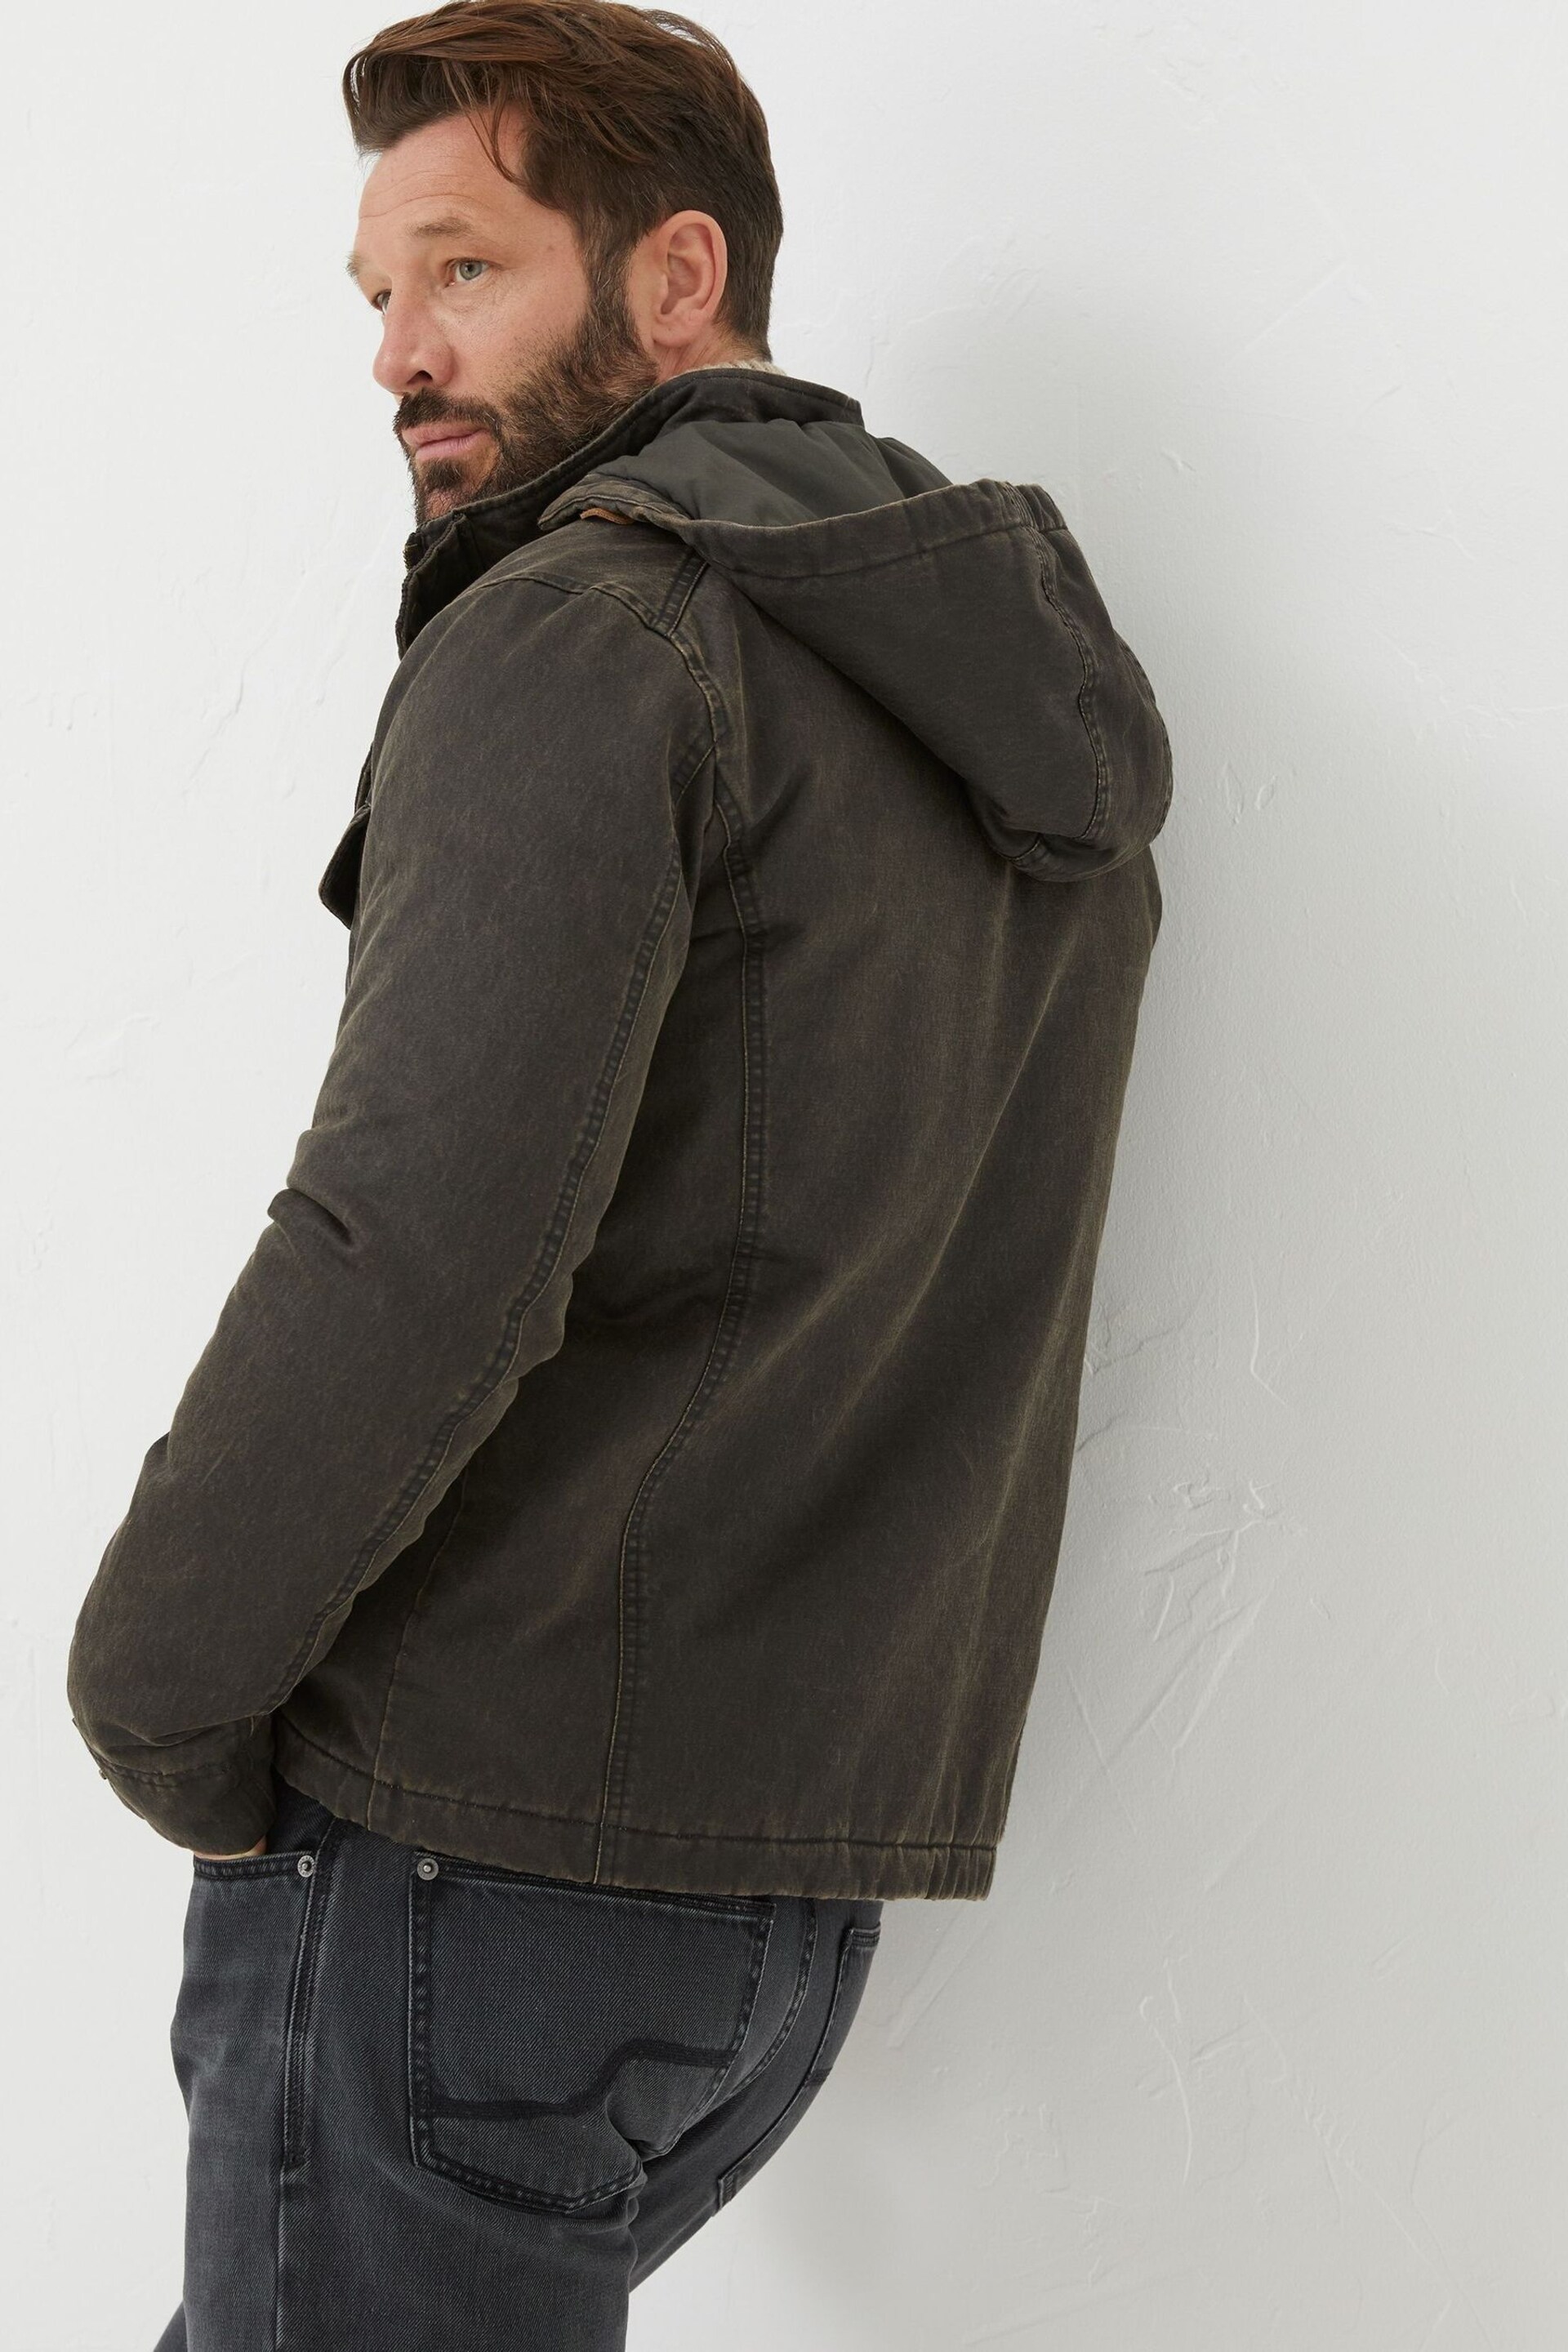 FatFace Brown Hooded Jacket - Image 3 of 6